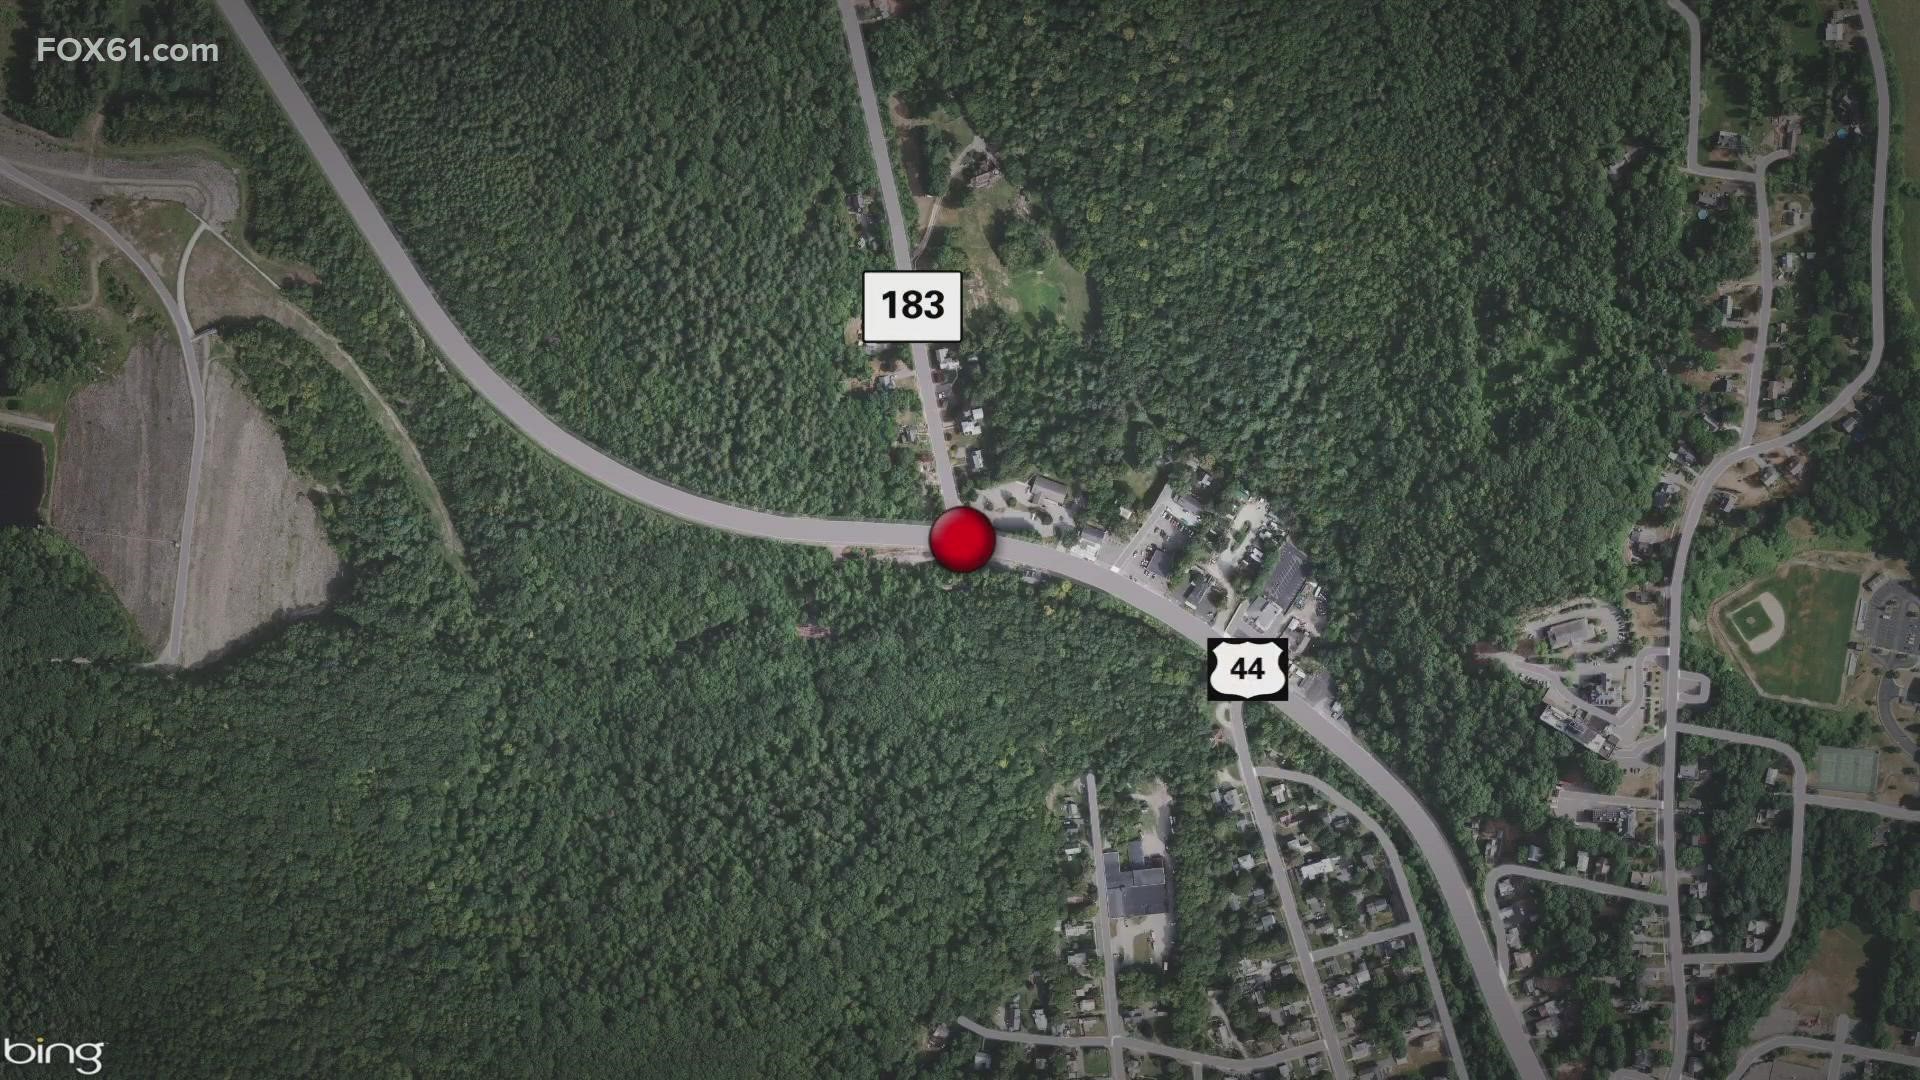 Route 44 is expected to be closed for several hours until the investigation is completed.